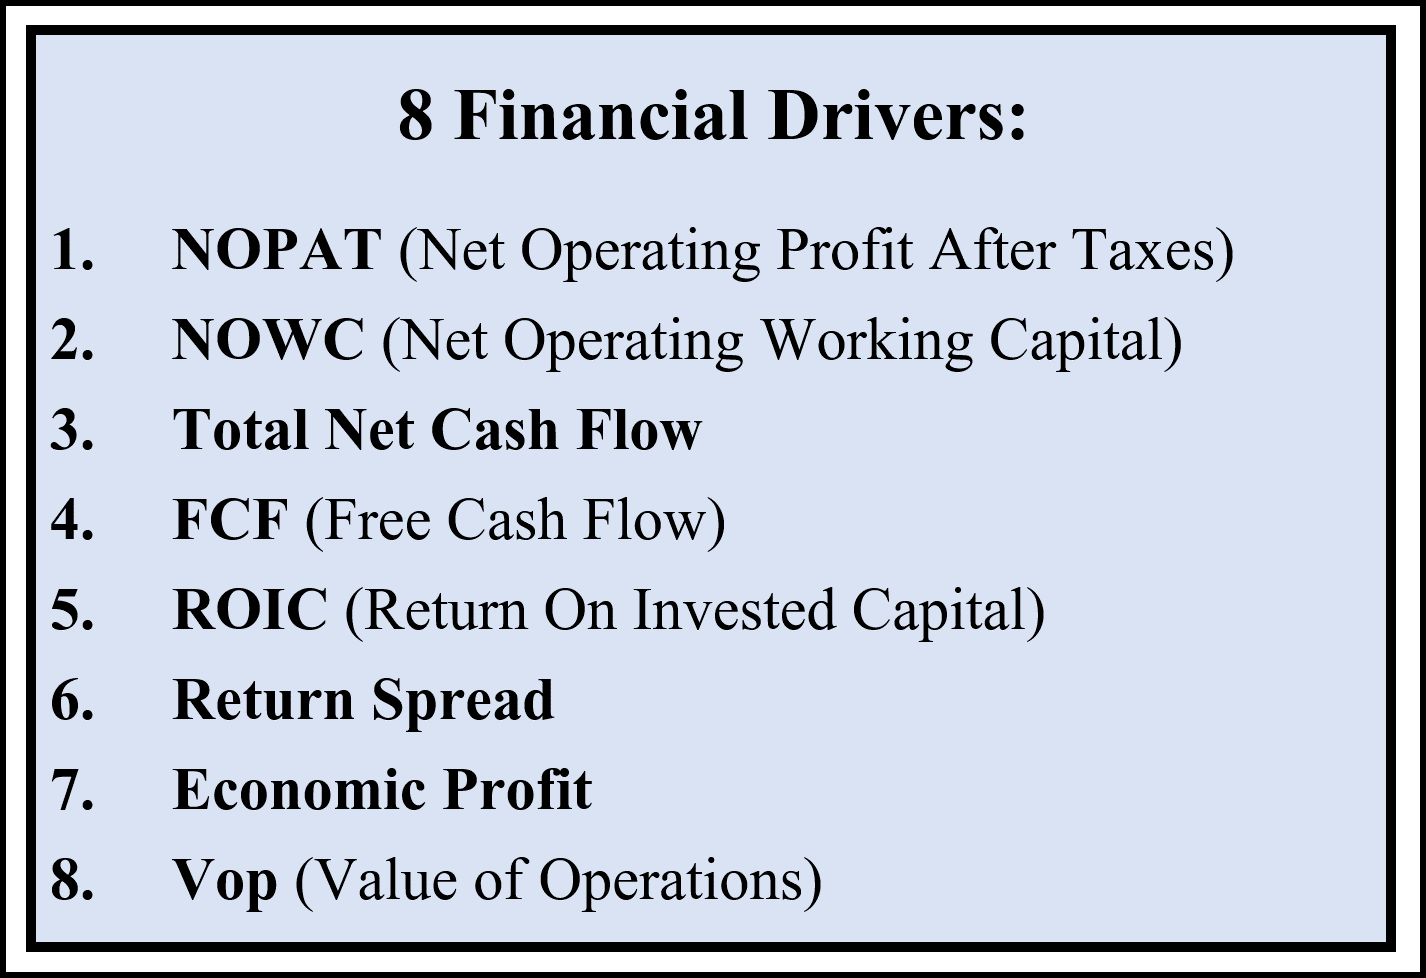 8 financial drivers 7.png